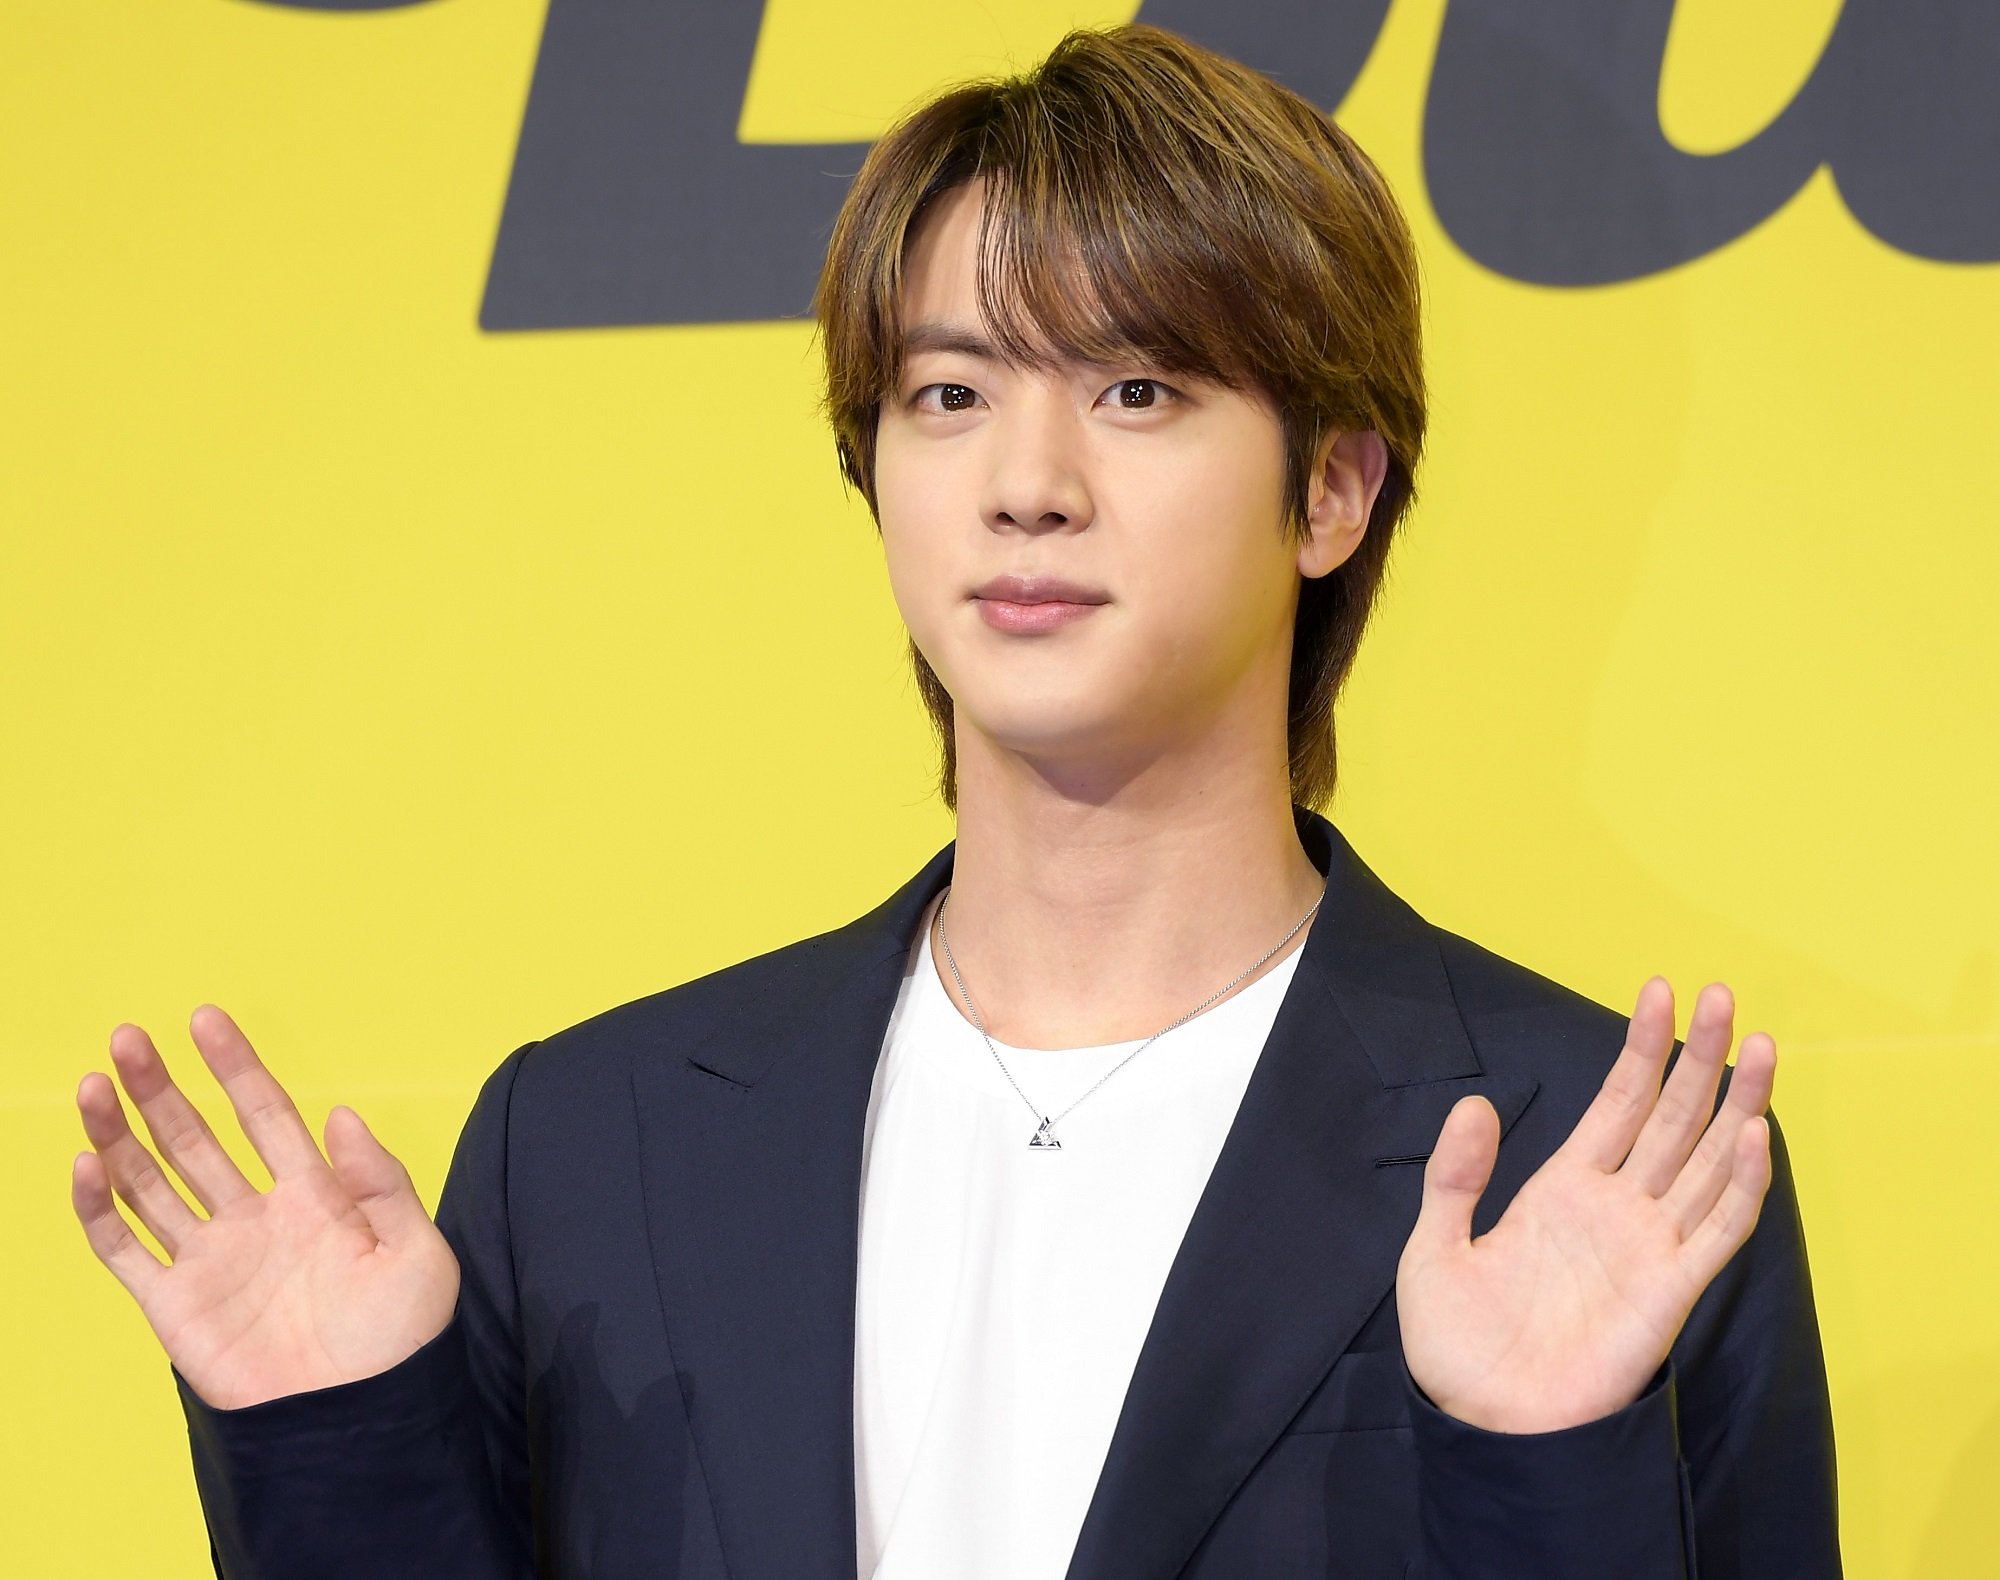 Jin of BTS holds up both hands while stanidng in front of a yellow background at BTS' 'Butter' press conference